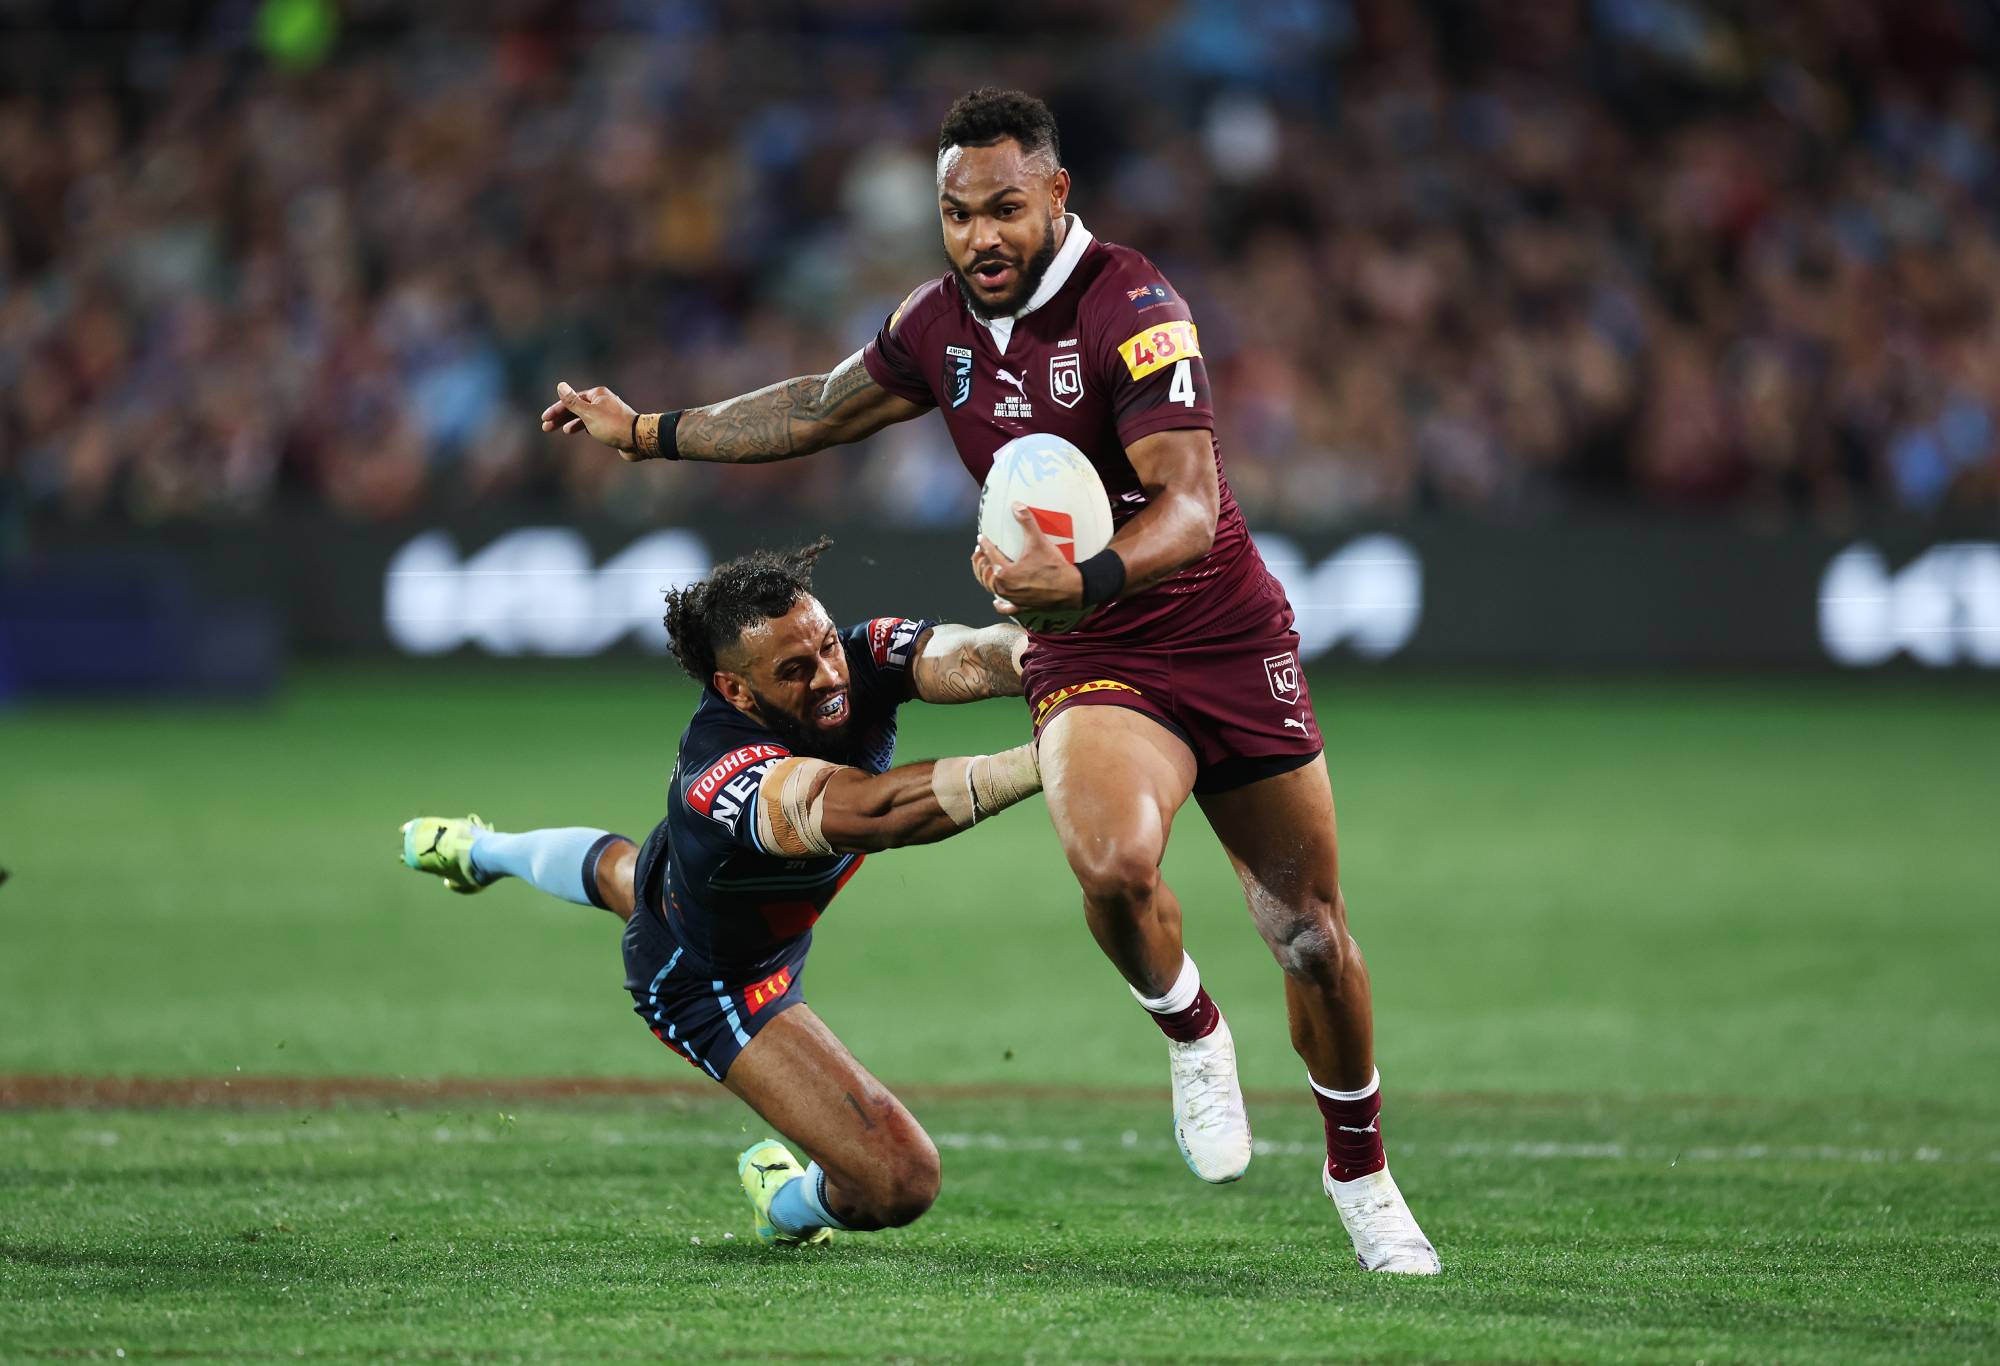 Hamiso Tabuai-Fidow of the Maroons beats the tackle of Josh Addo-Carr of the Blues before scoring a try during game one of the 2023 State of Origin series between the Queensland Maroons and New South Wales Blues at Adelaide Oval on May 31, 2023 in Adelaide, Australia. (Photo by Mark Kolbe/Getty Images)